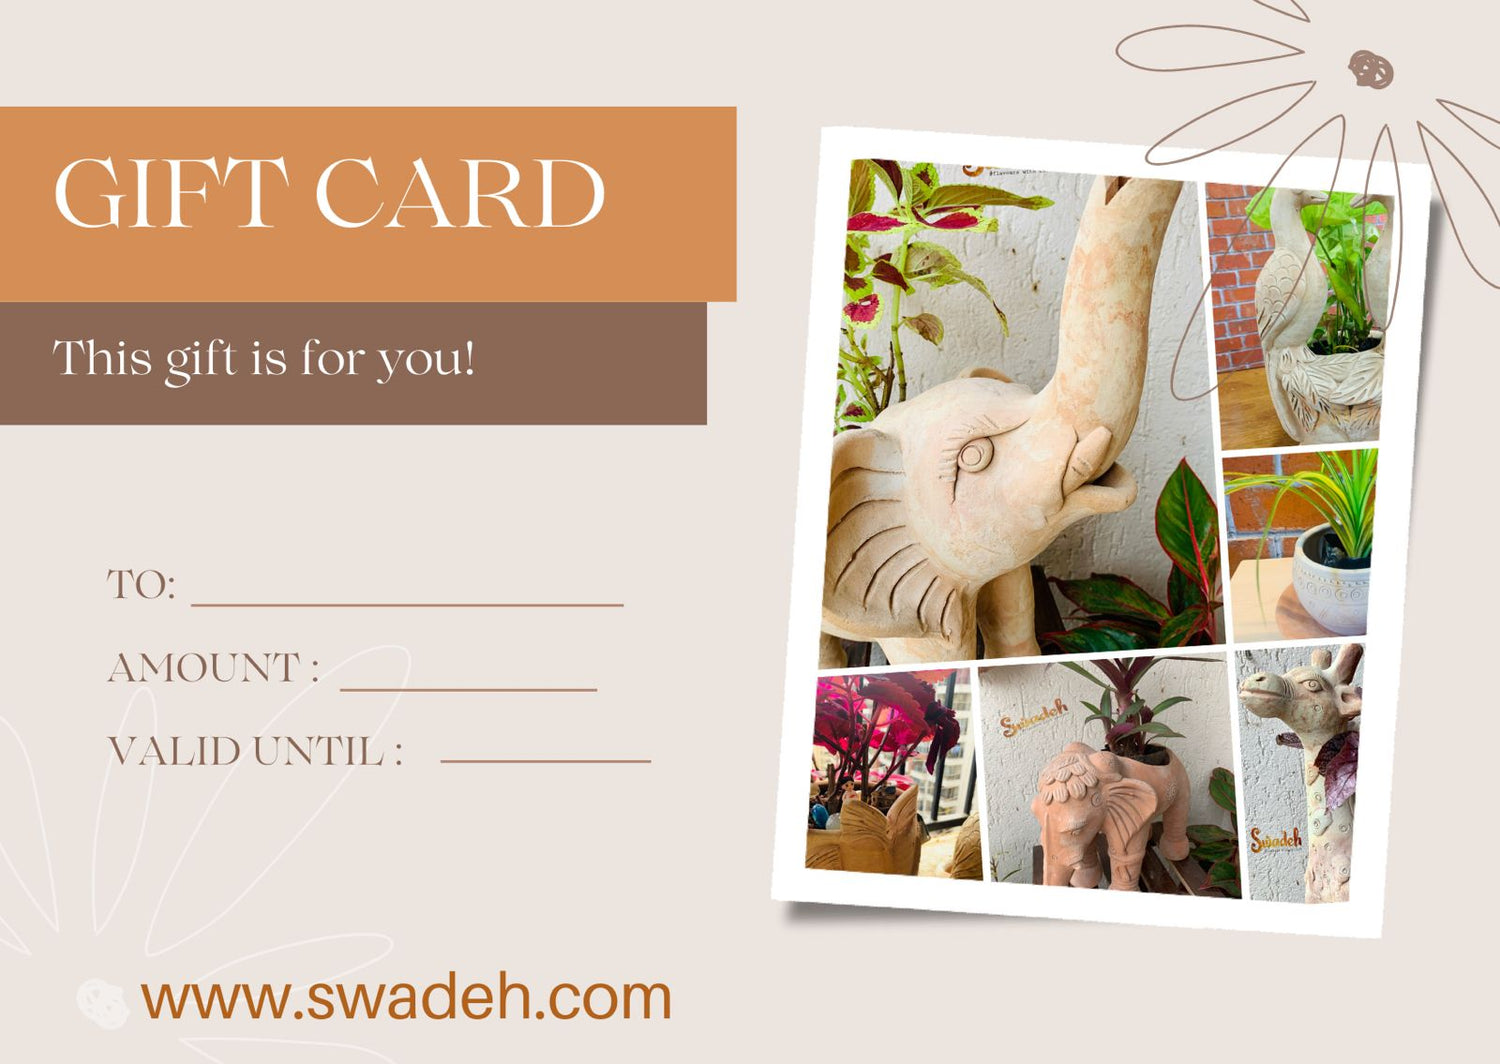 Swadeh - Handcrafted Pottery - Gift Cards